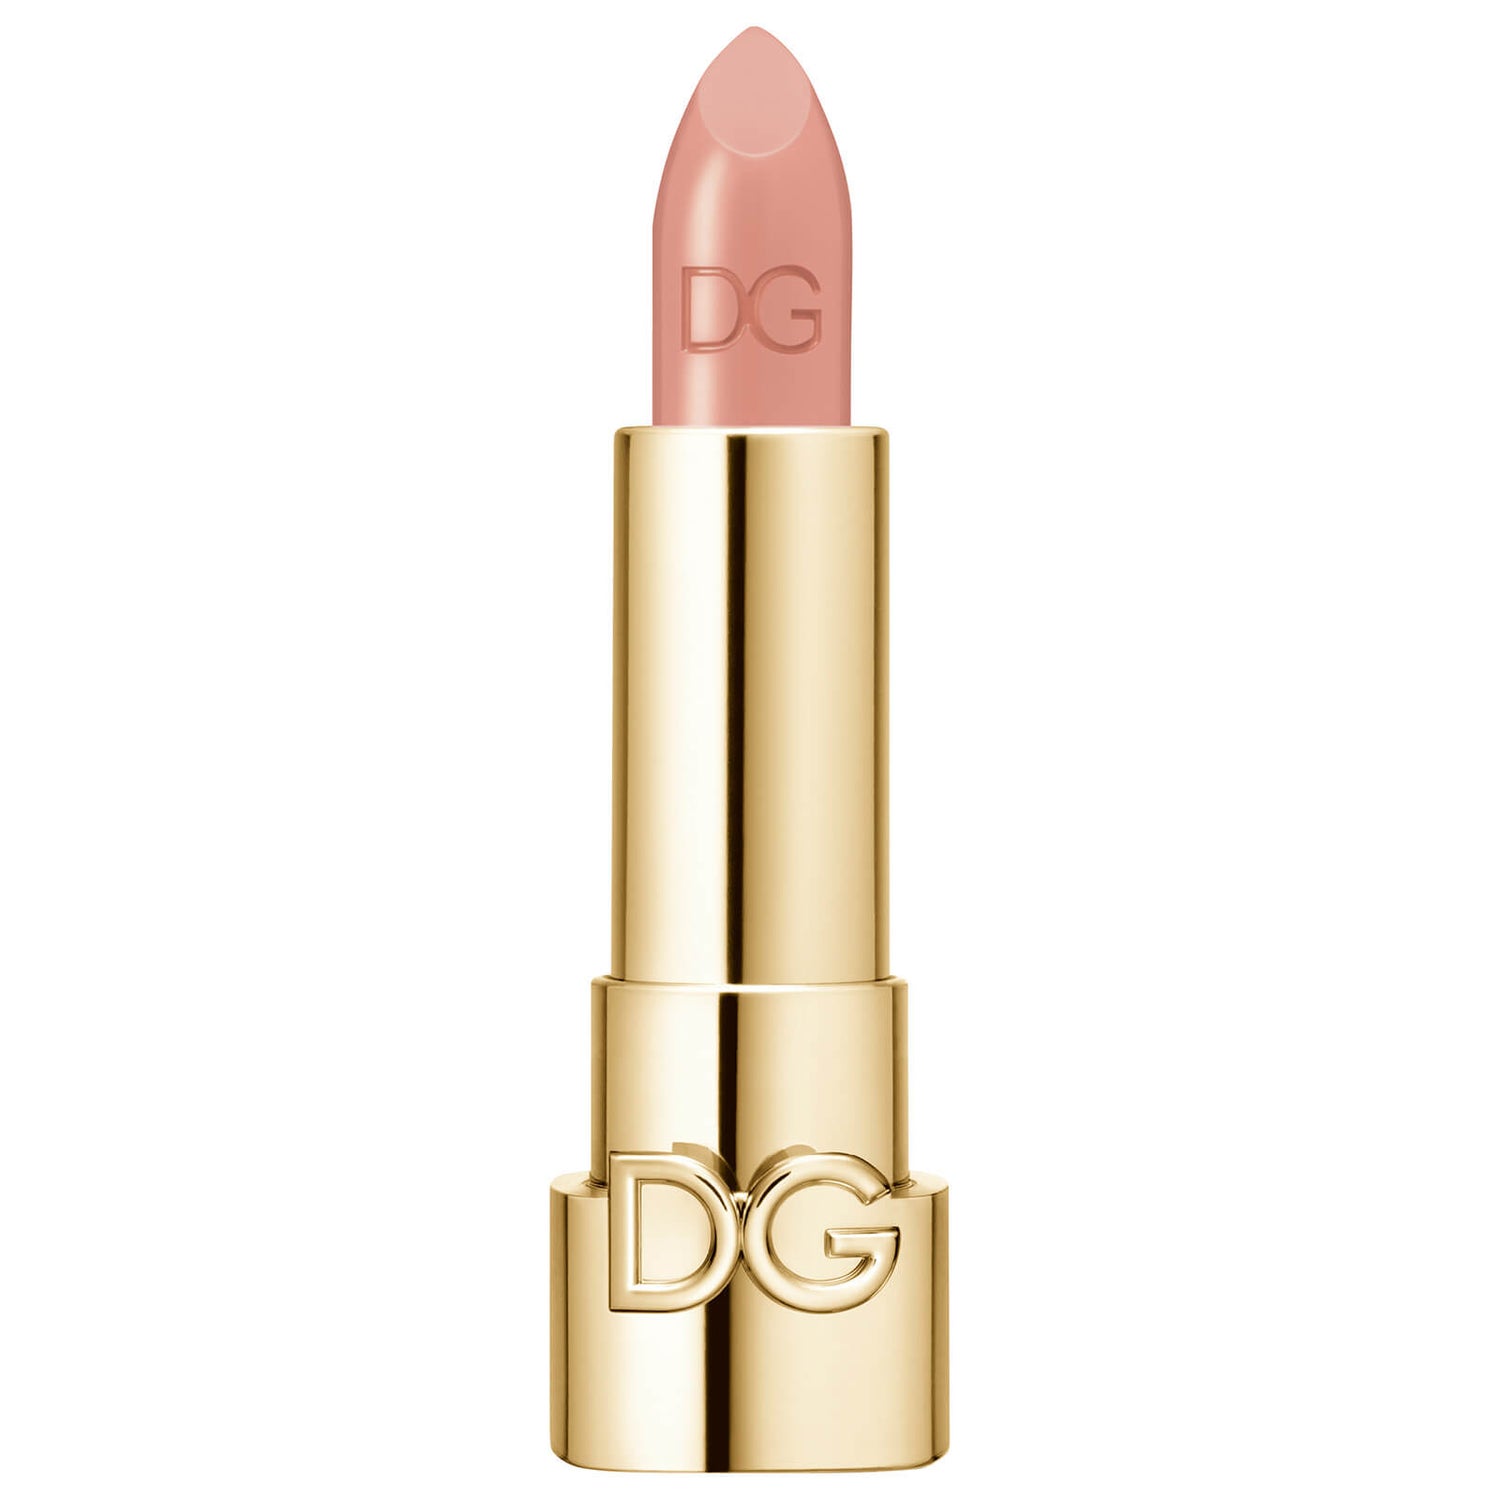 Dolce&Gabbana The Only One Lipstick 1.7g (No Cap) (Various Shades)